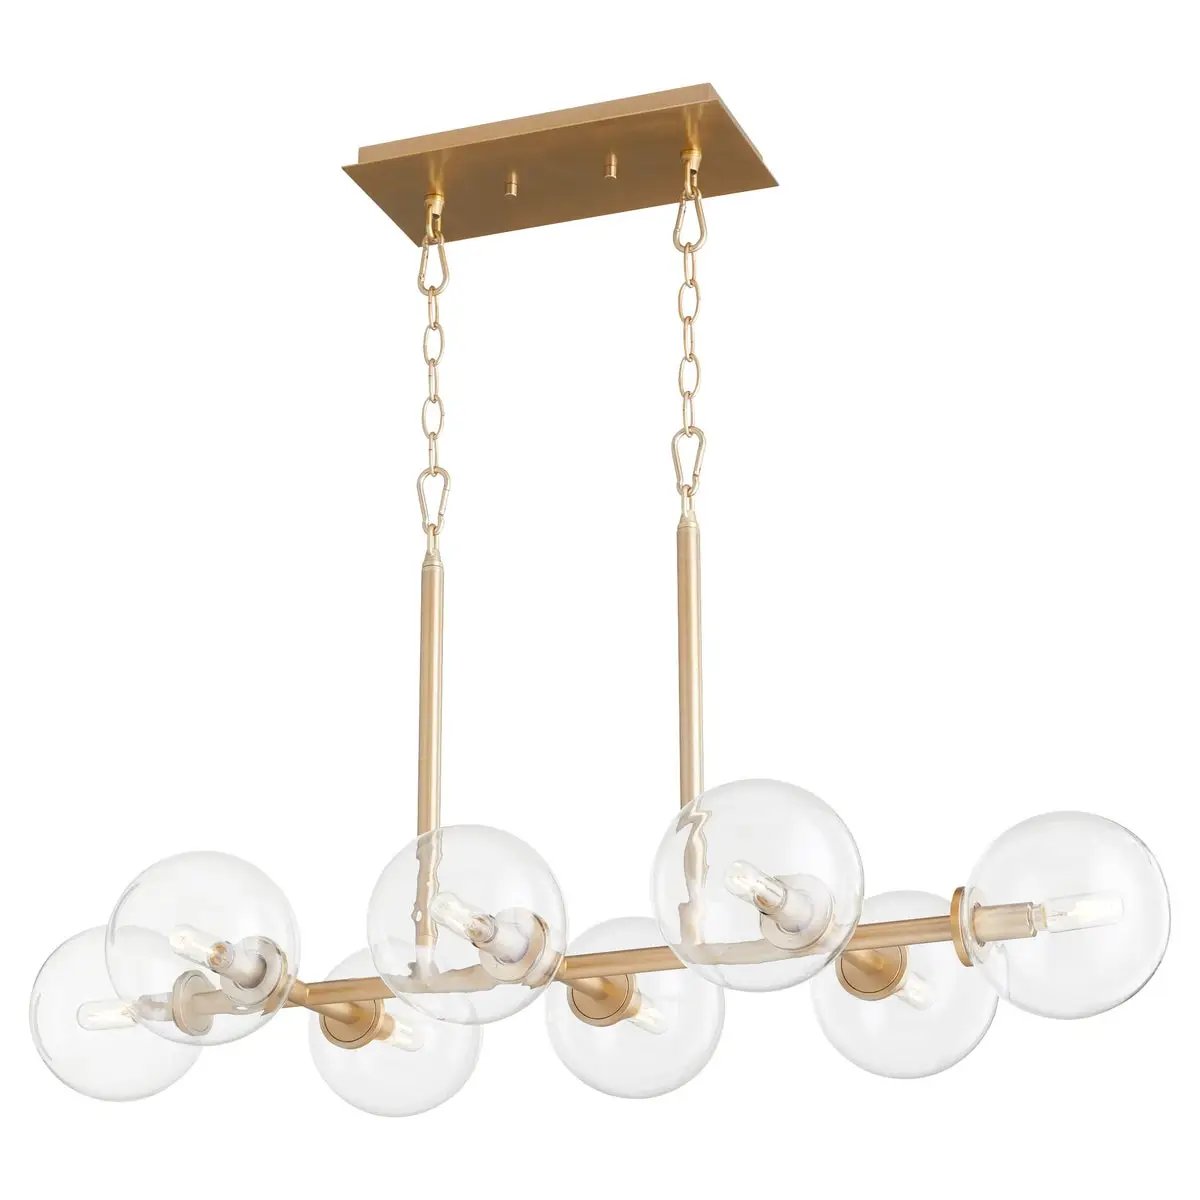 Linear Sputnik Chandelier with clear glass domes and aged brass frames, adding mid-century modern appeal. Dramatic and charming lighting fixture with superior design.